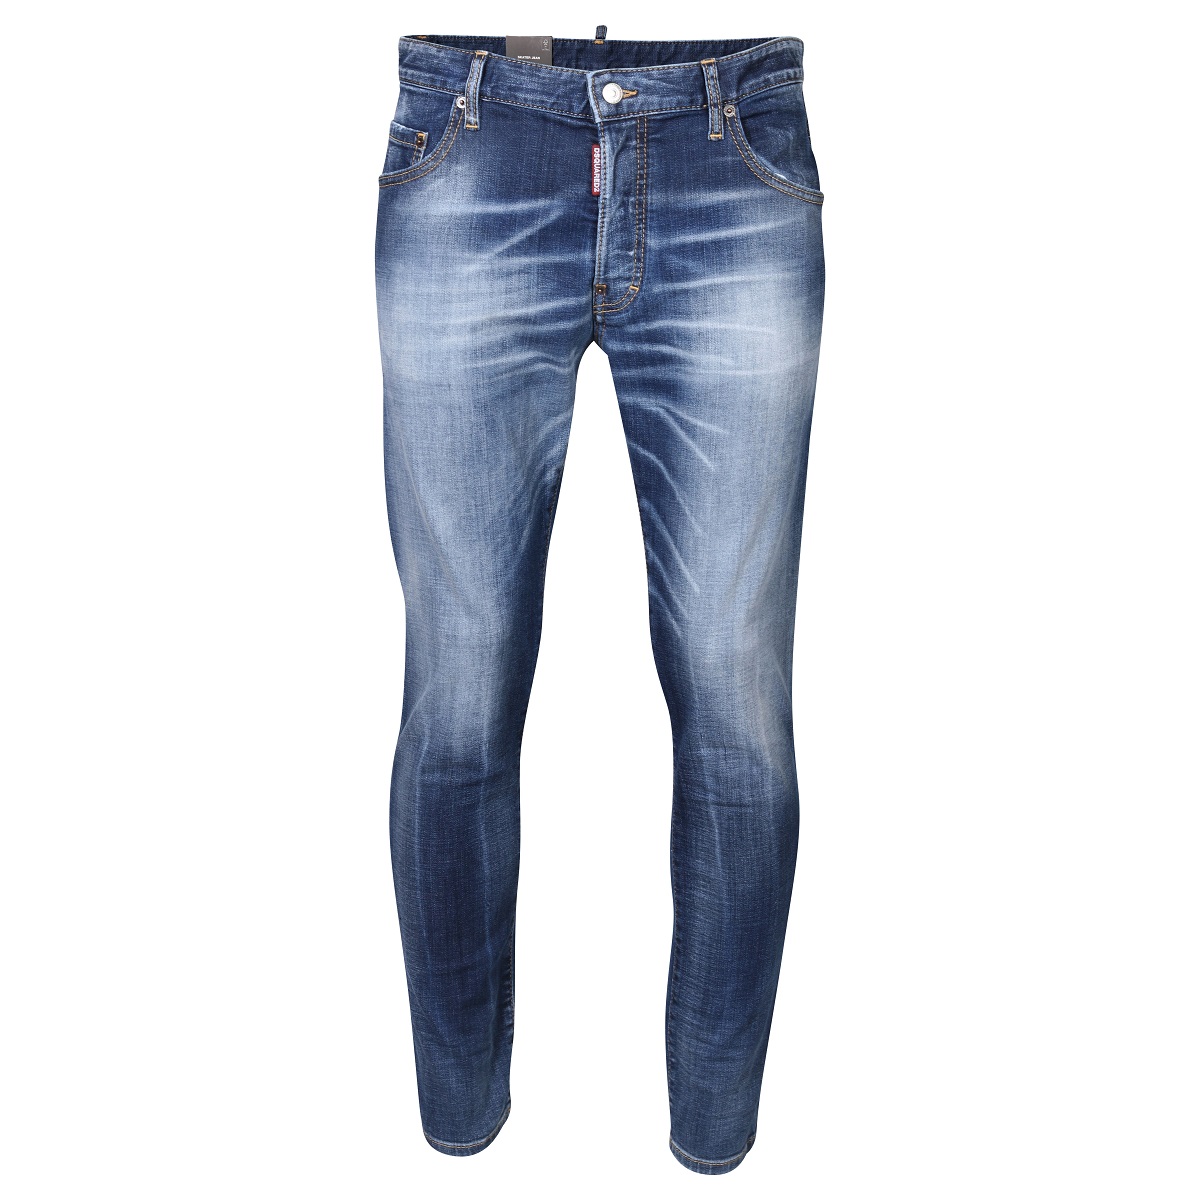 DSQUARED2 Jeans Skater in Washed Blue